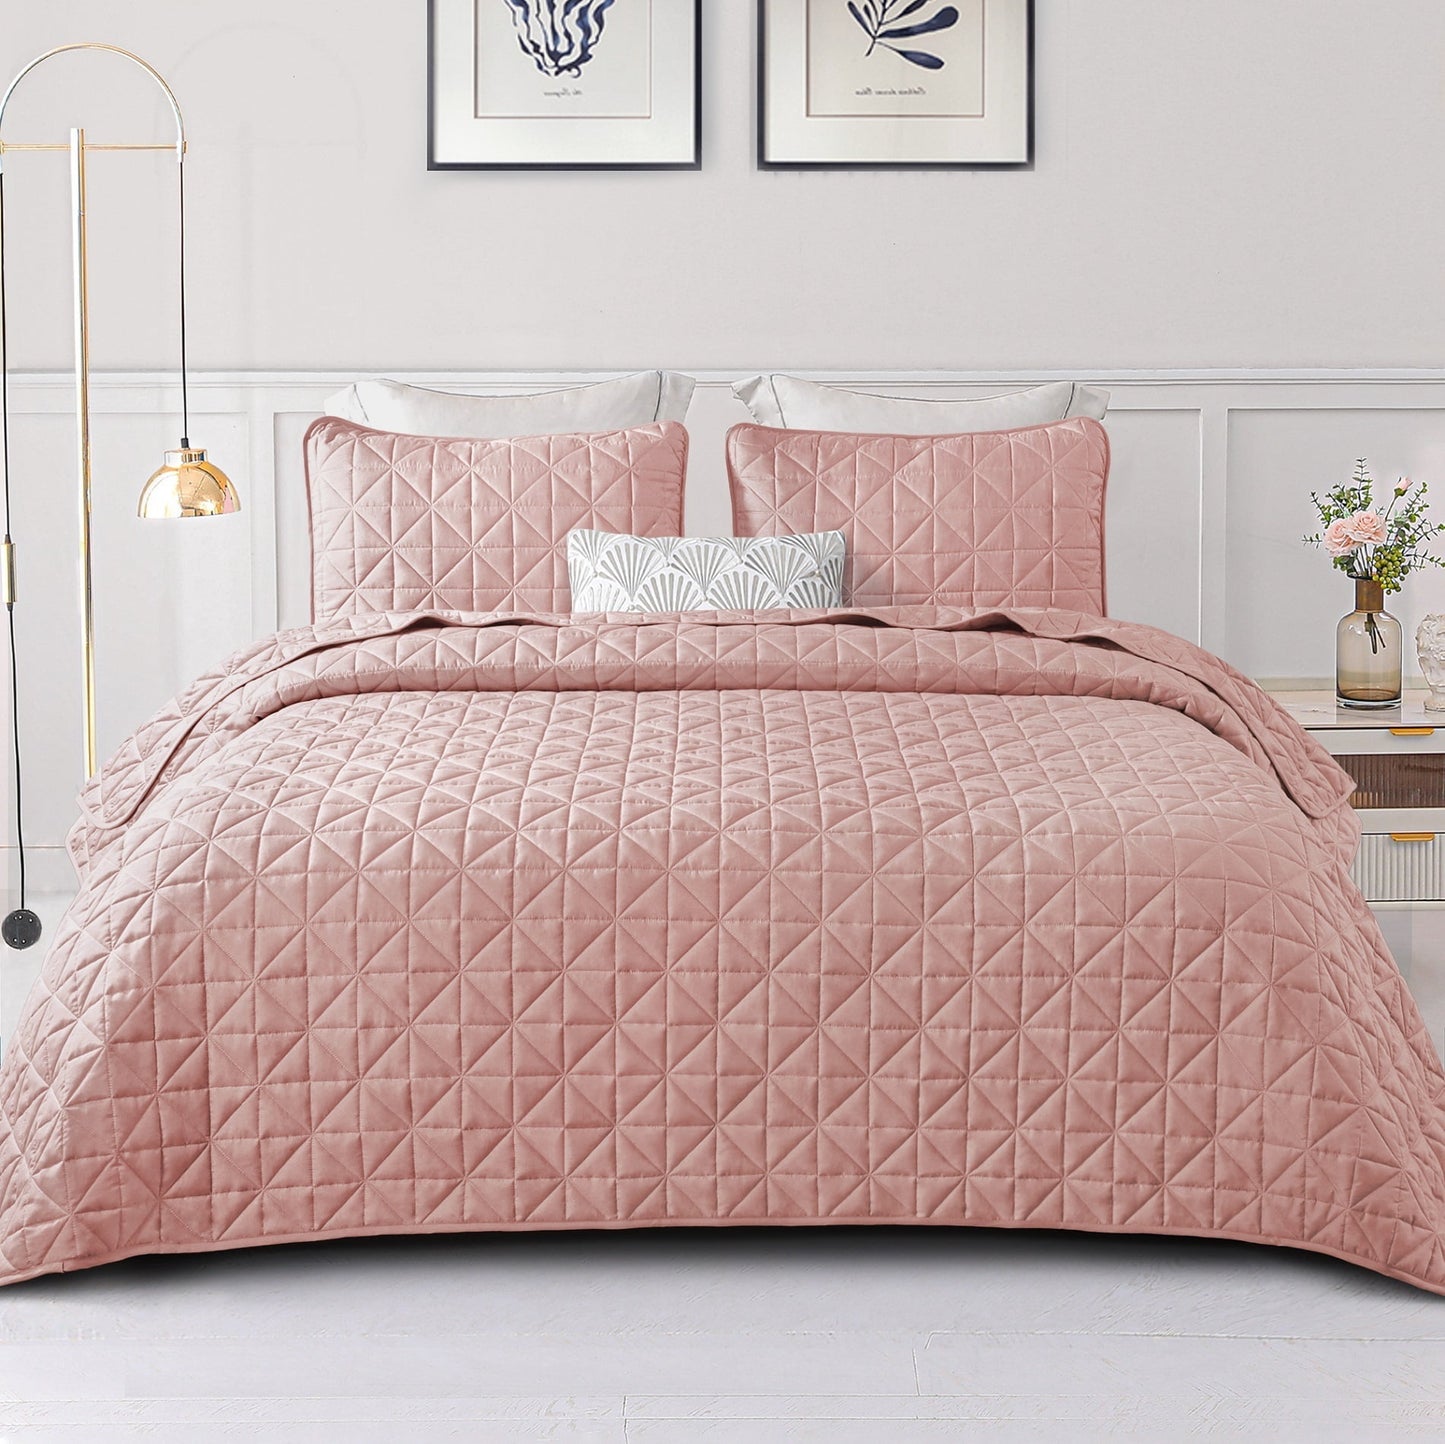 Exclusivo Mezcla Queen Quilt Bedding Set for All Seasons, Lightweight Soft Pink Quilts Queen Size Bedspreads Coverlets Bed Cover with Geometric Stitched Pattern, (1 Quilt, 2 Pillow Shams)